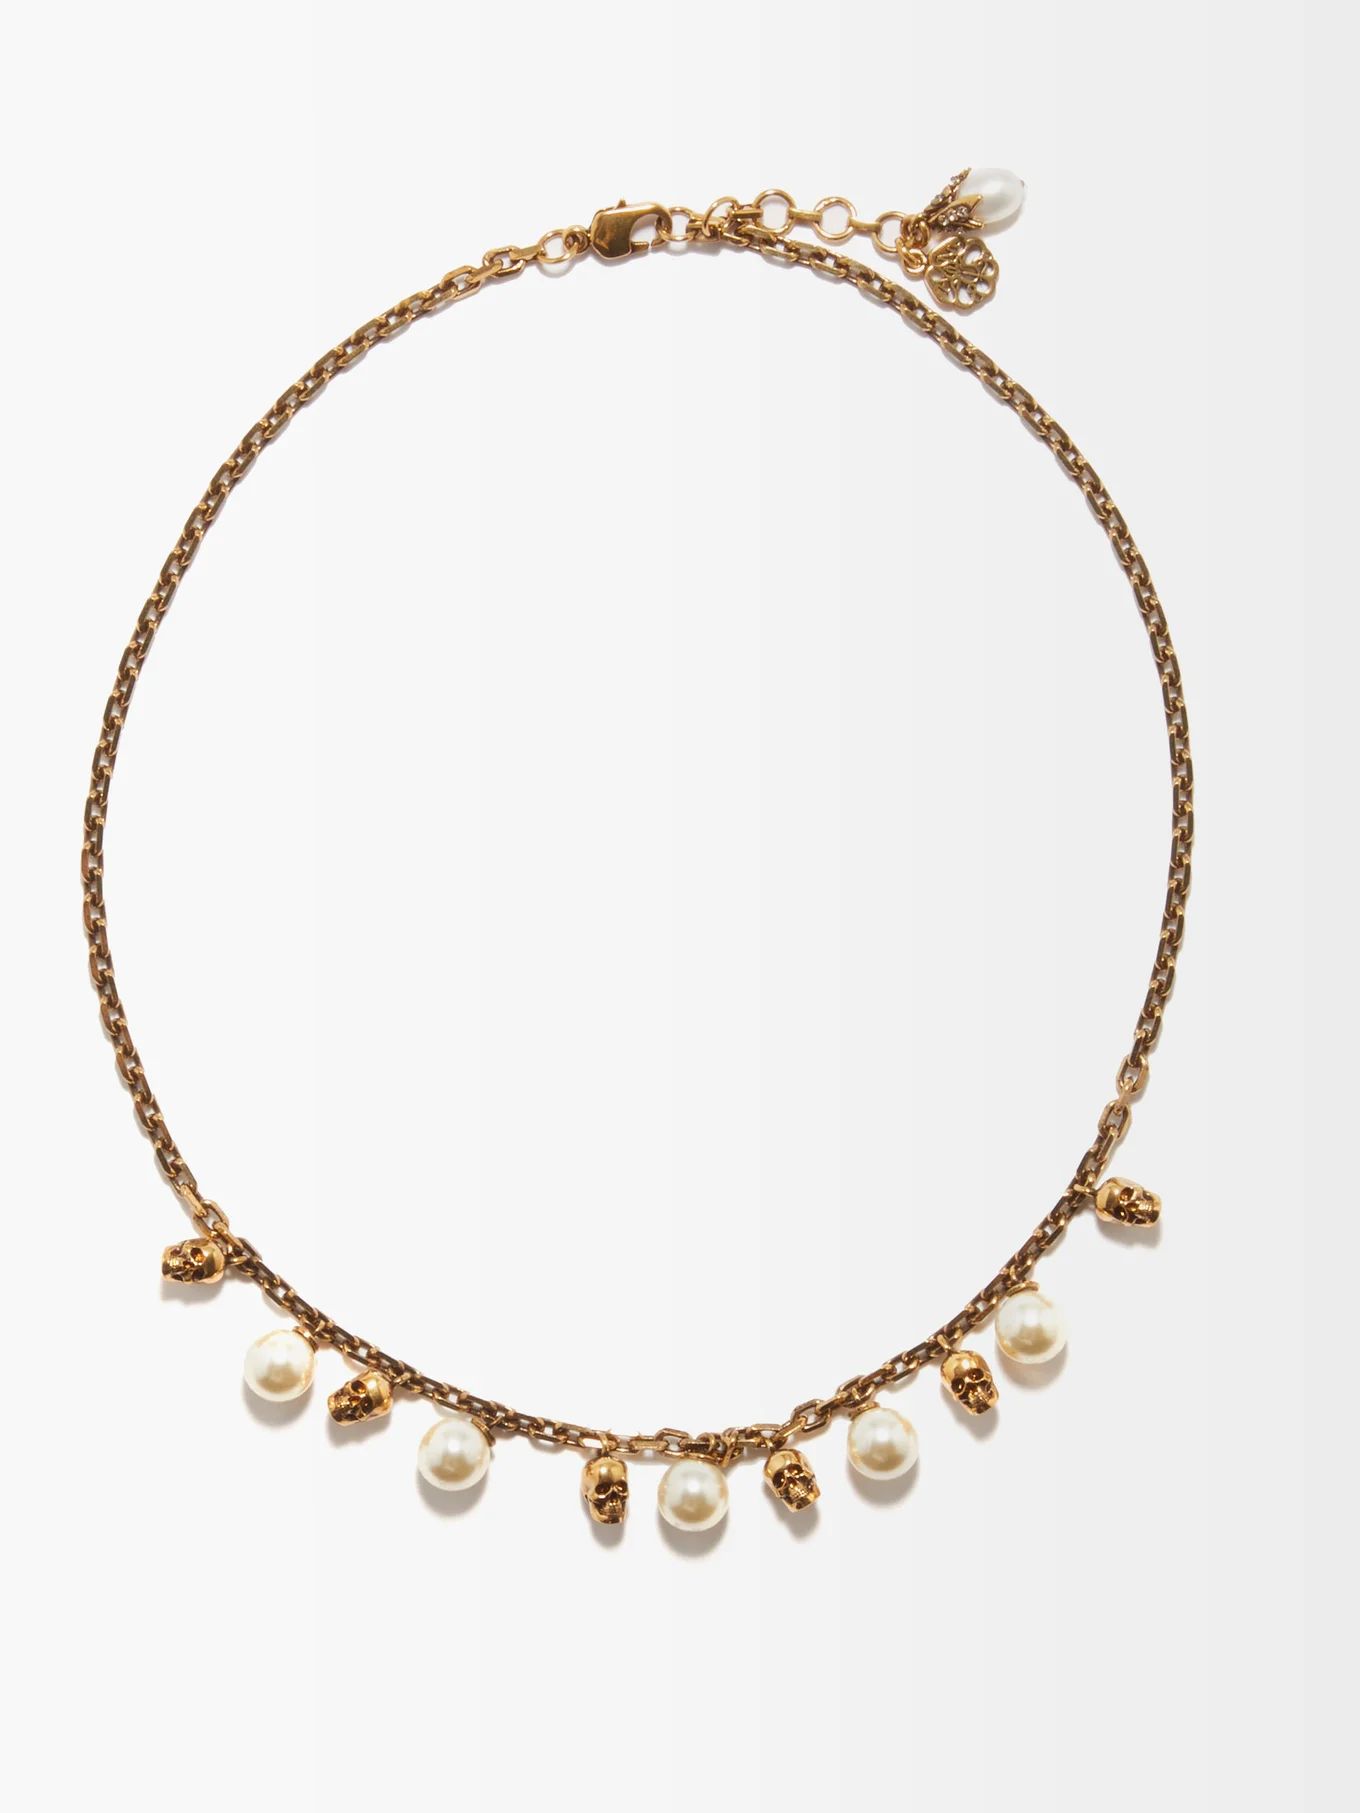 Skull and faux-pearl choker | Alexander McQueen | Matches (US)